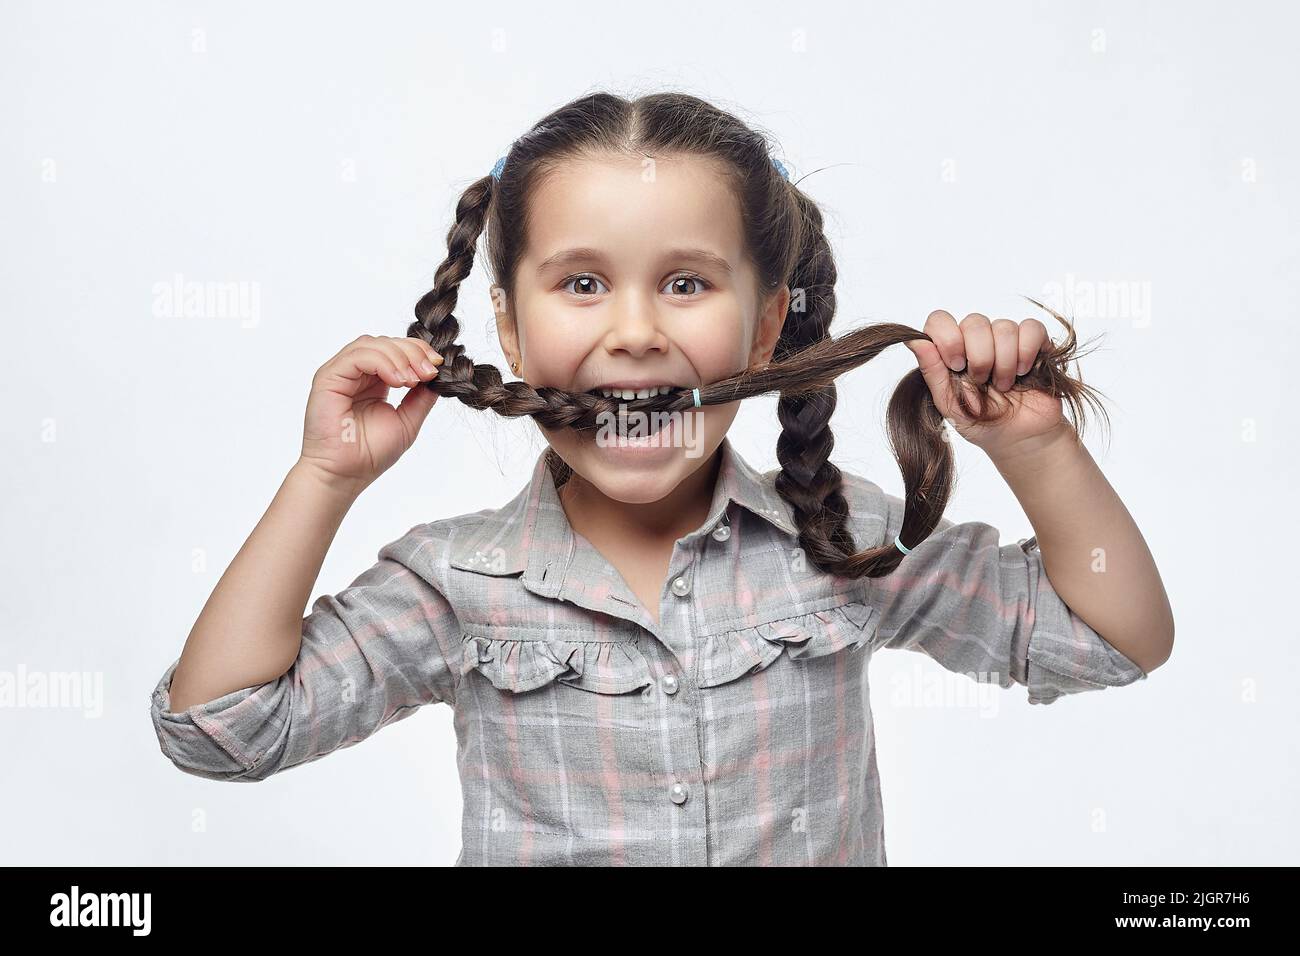 portrait of a beautiful little black-haired girl in close-up. she bites her braided pigtail with a smile. Stock Photo